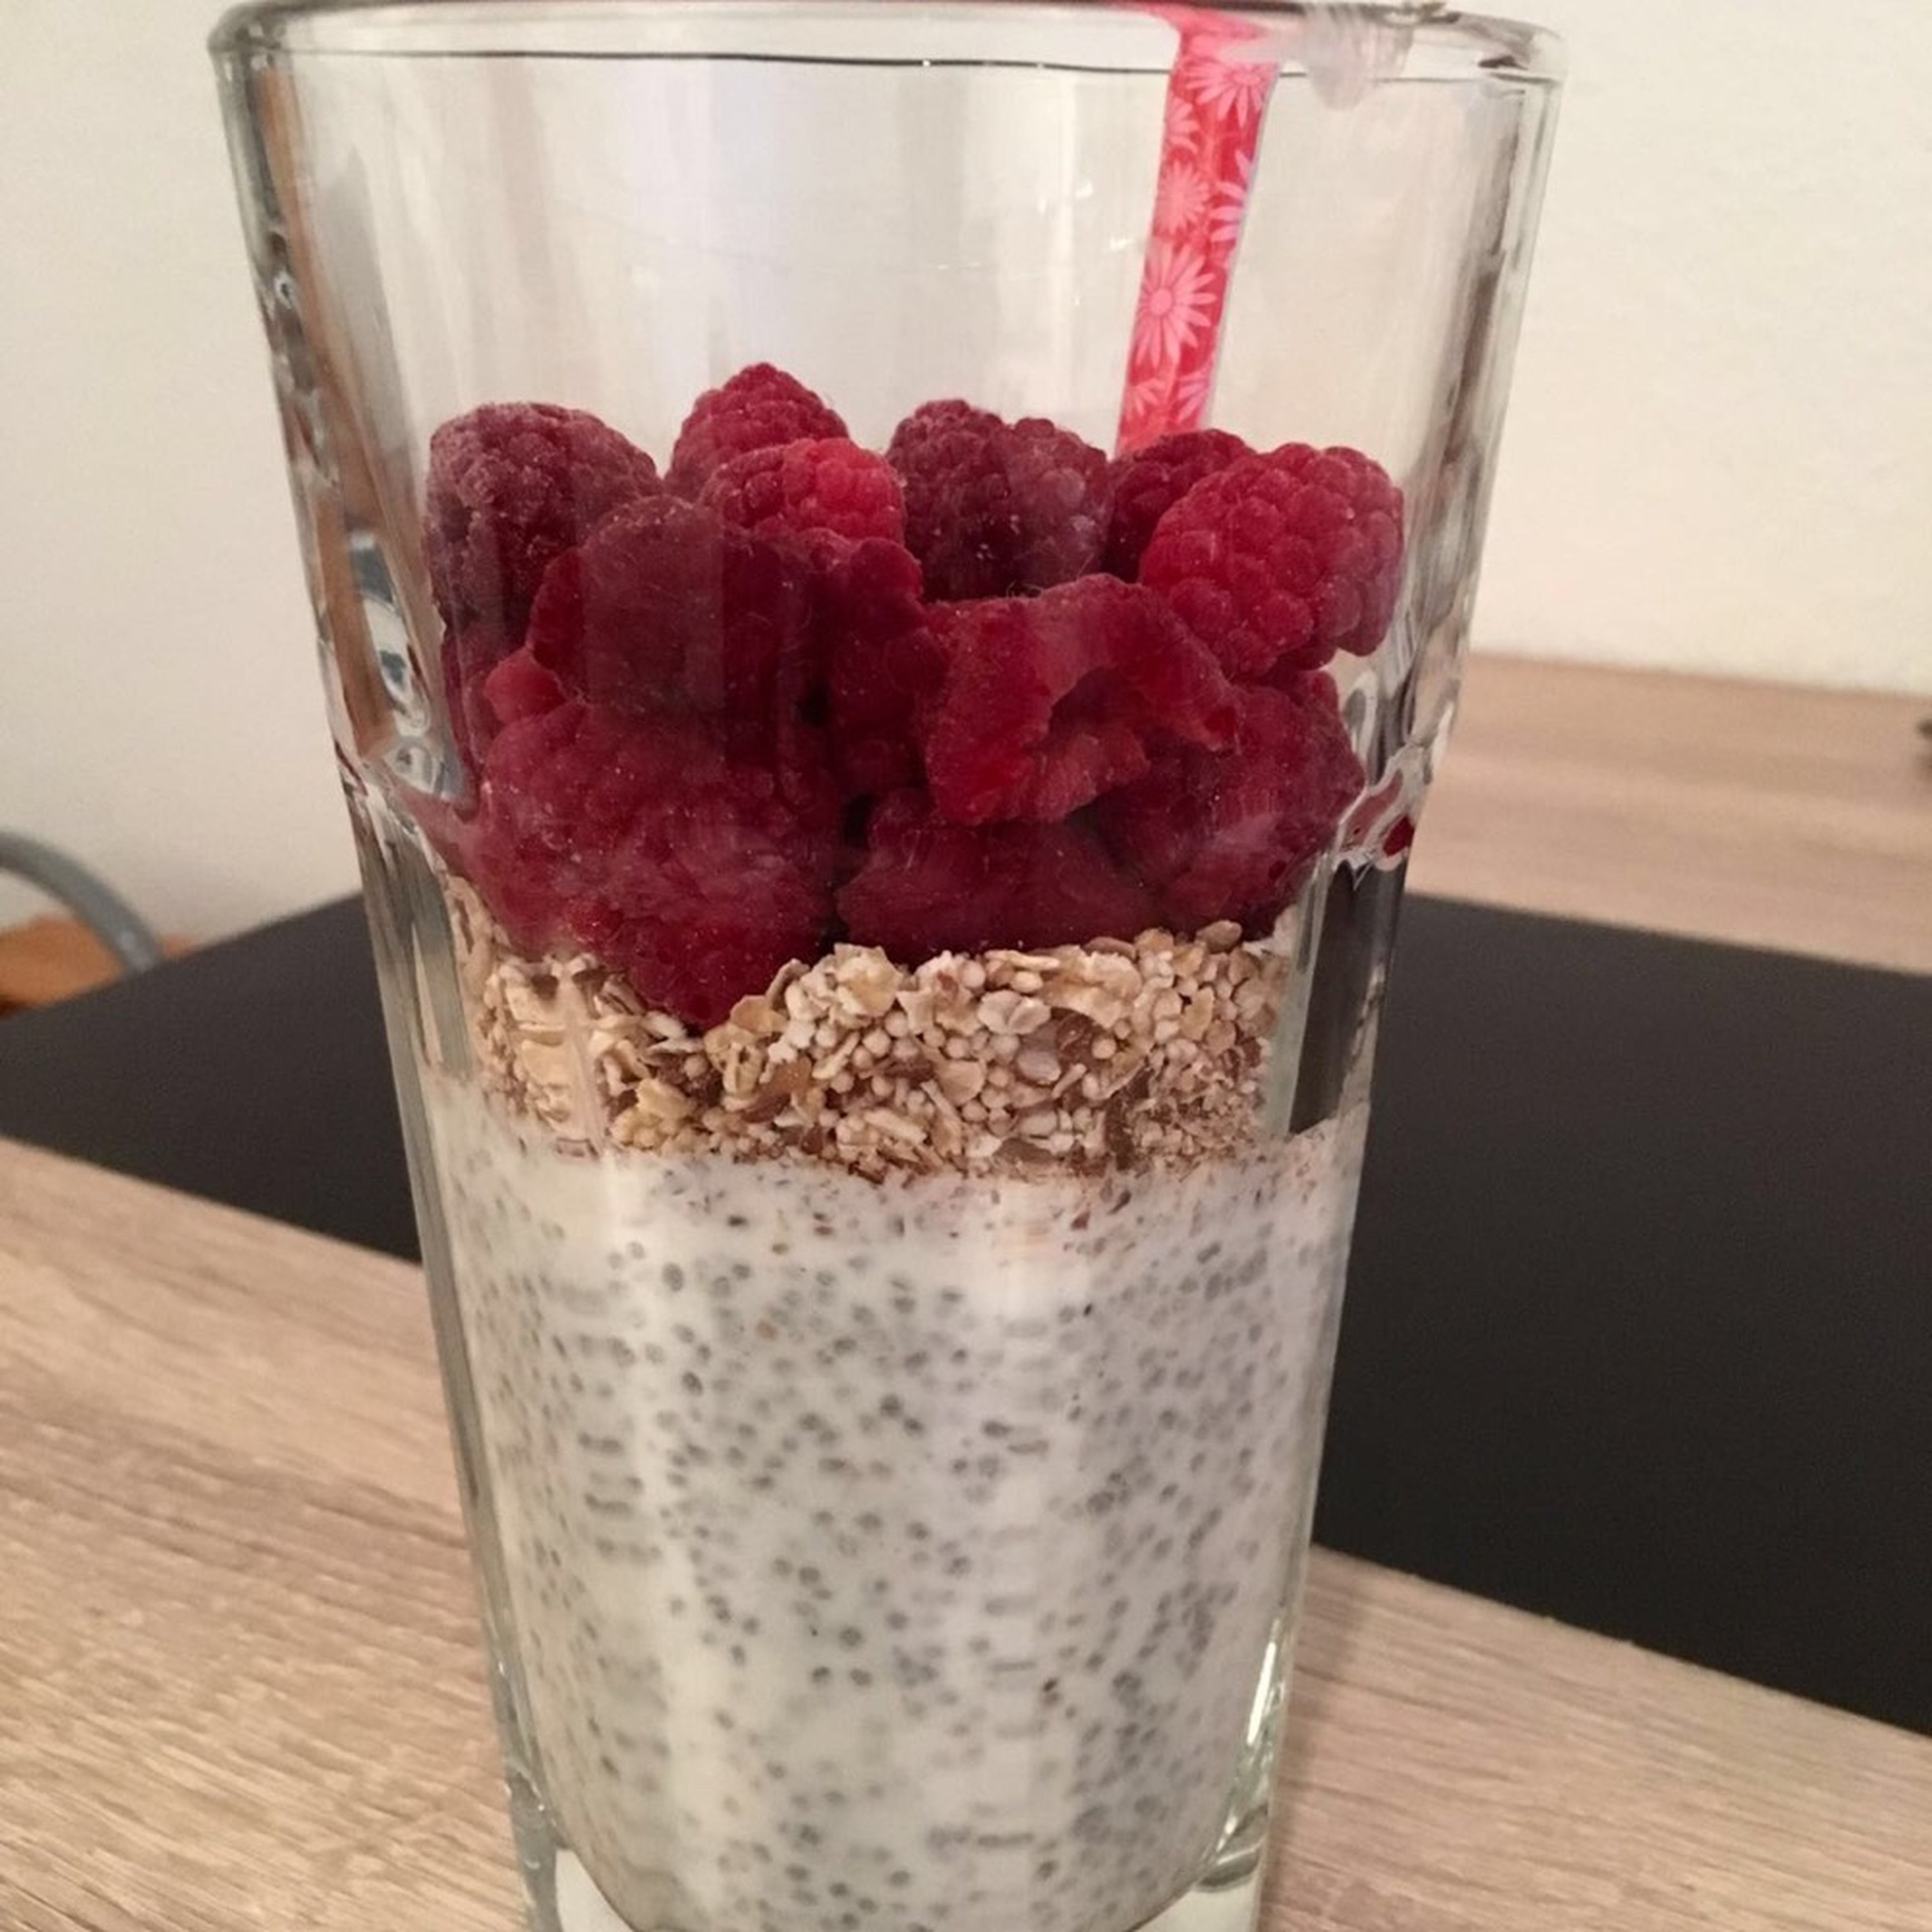 Add frozen raspberries on top, or other berries of choice, but it’s best to use frozen ones as they help the rolled oats to soak in.